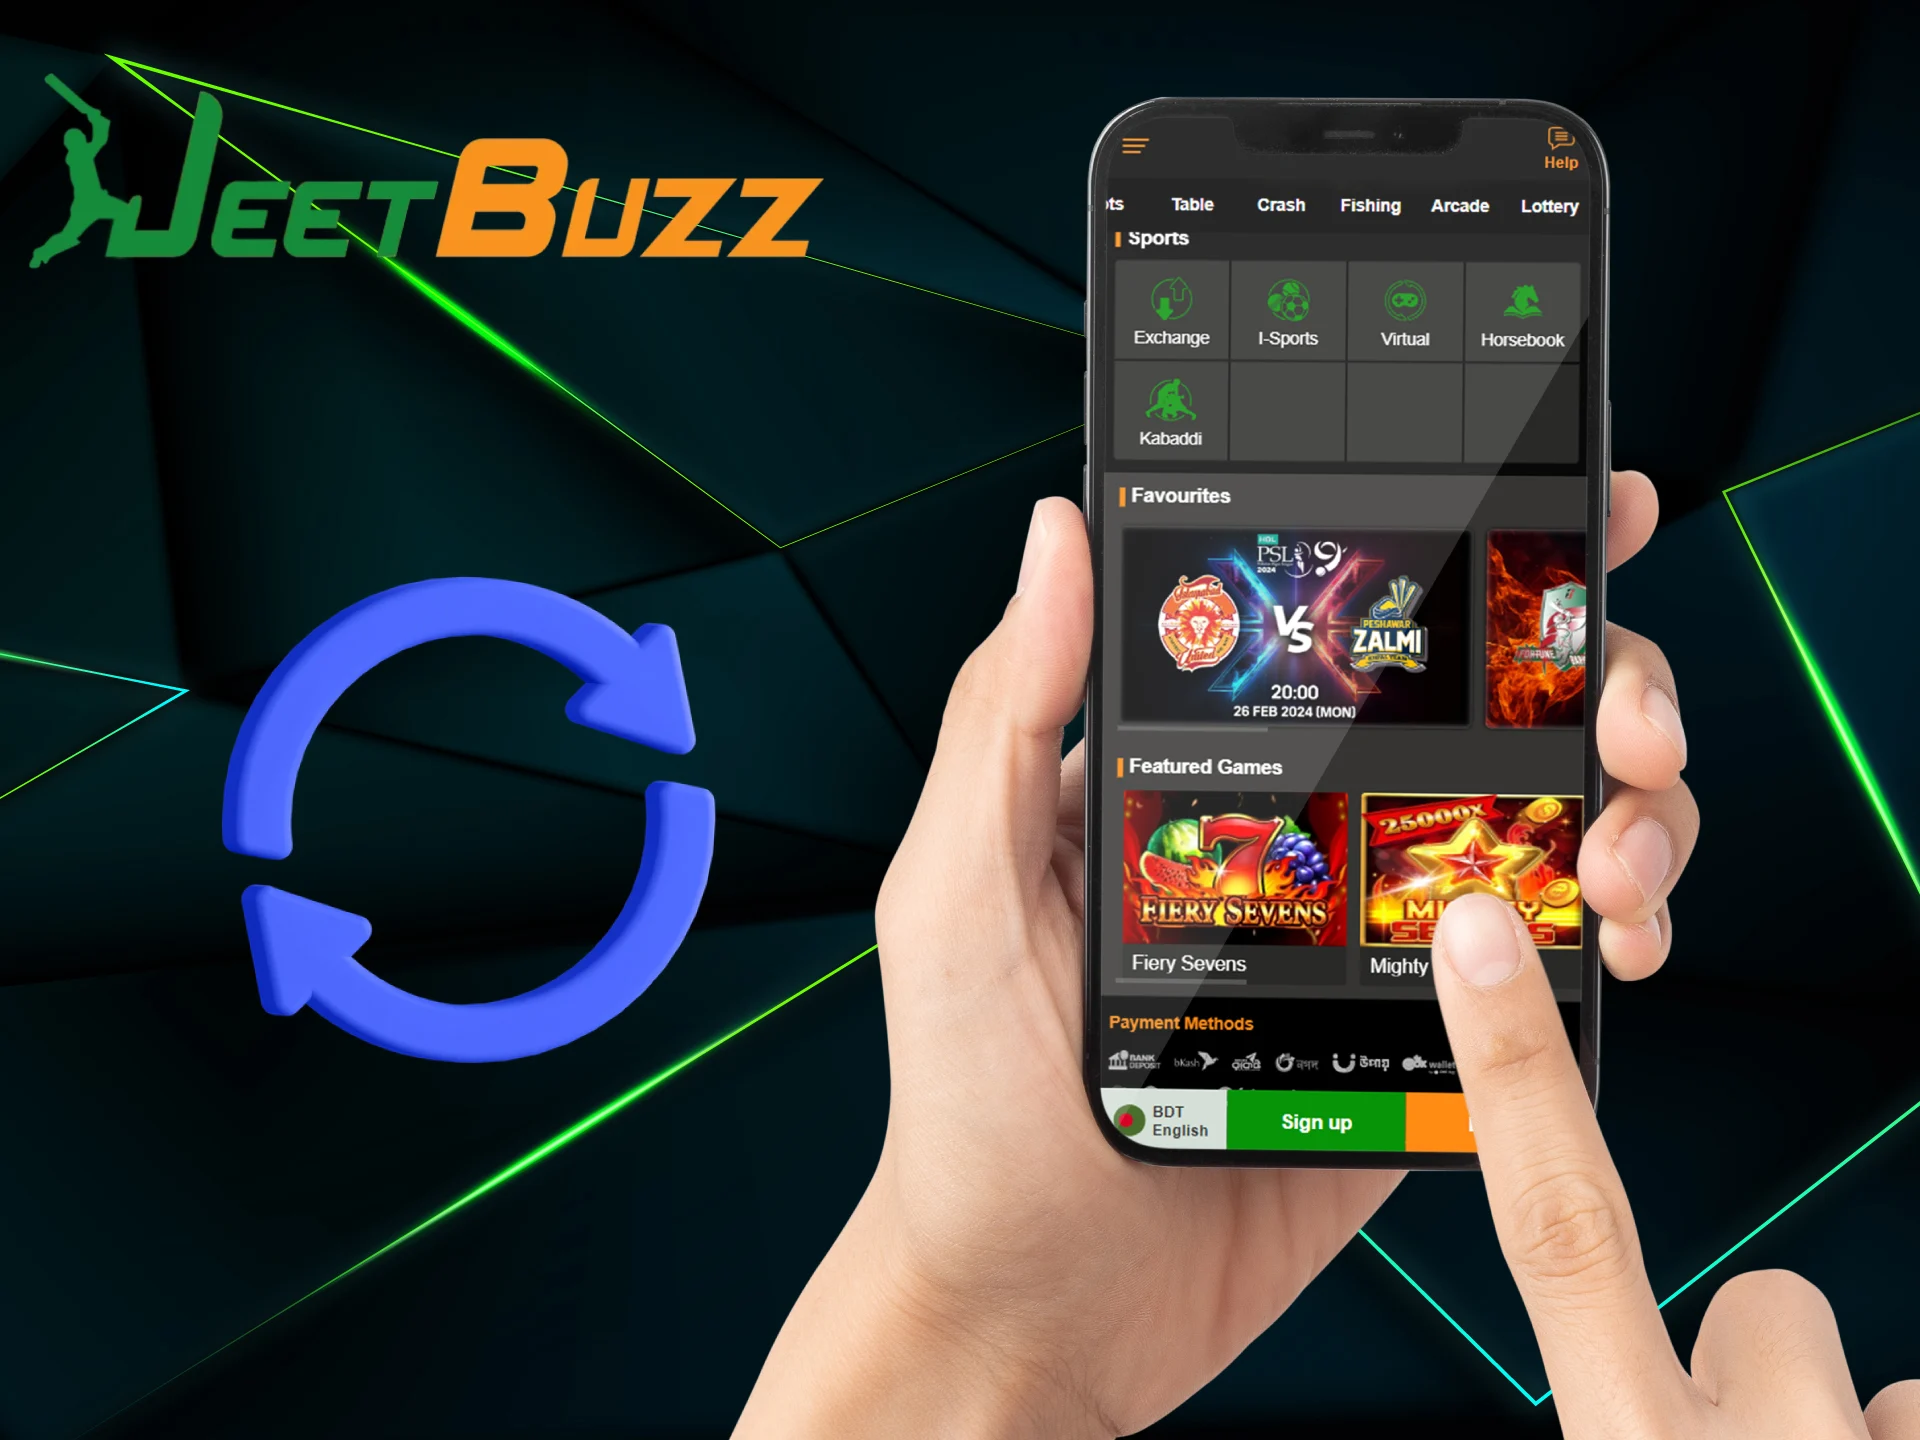 Download the updated version of the app on the official JeetBuzz website.